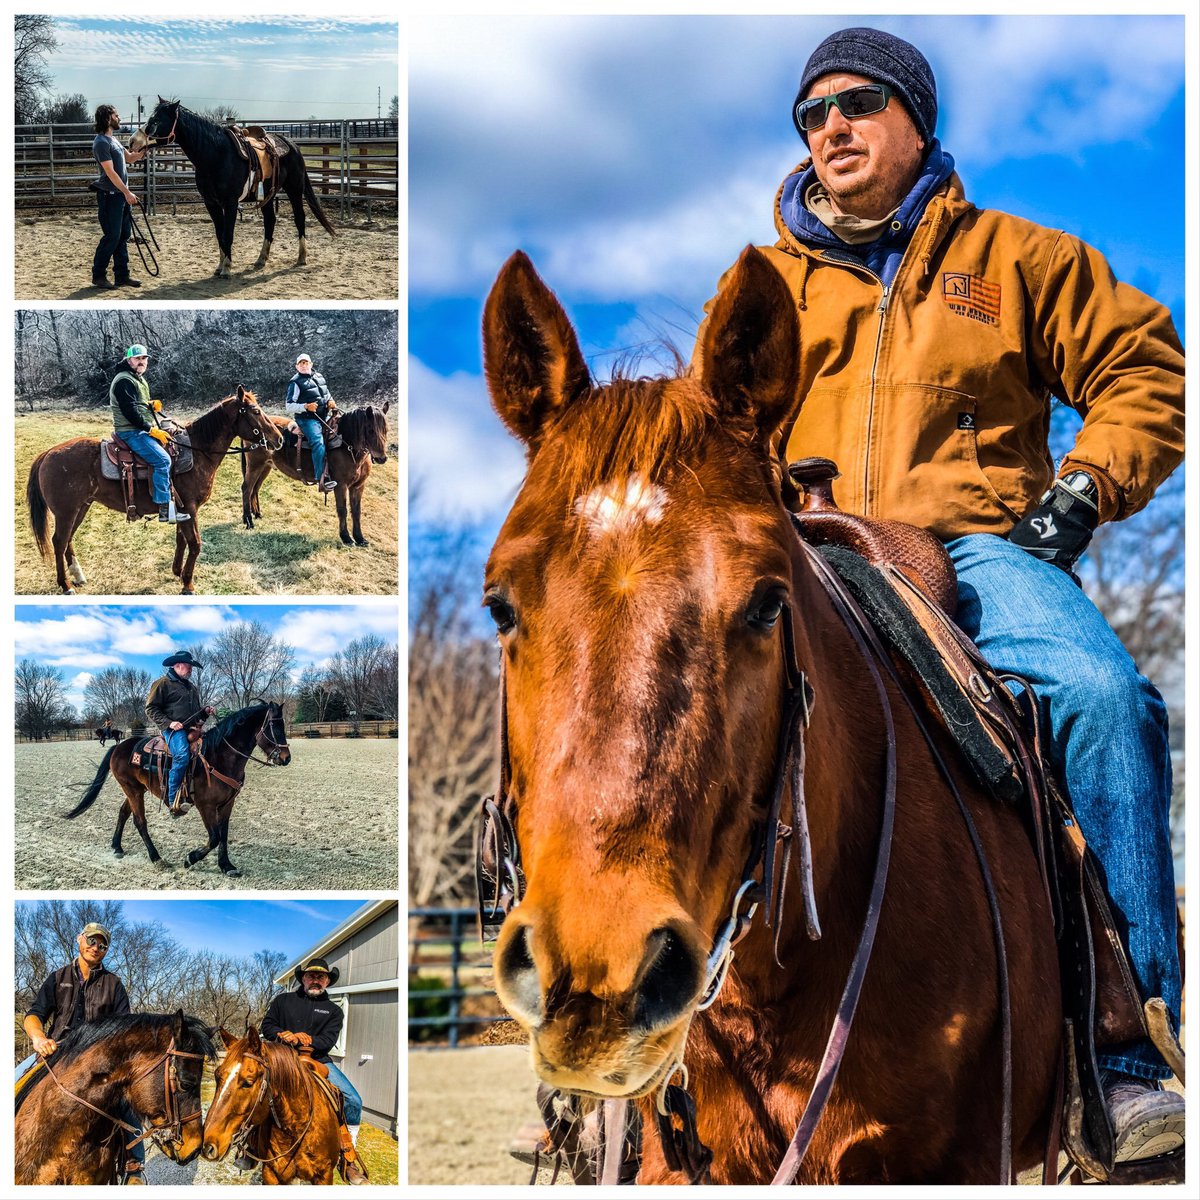 The @wh4vets team is working hard everyday preparing our horses for our Spring and Summer classes. Check us out and see how you can help. #oneveteranatatime